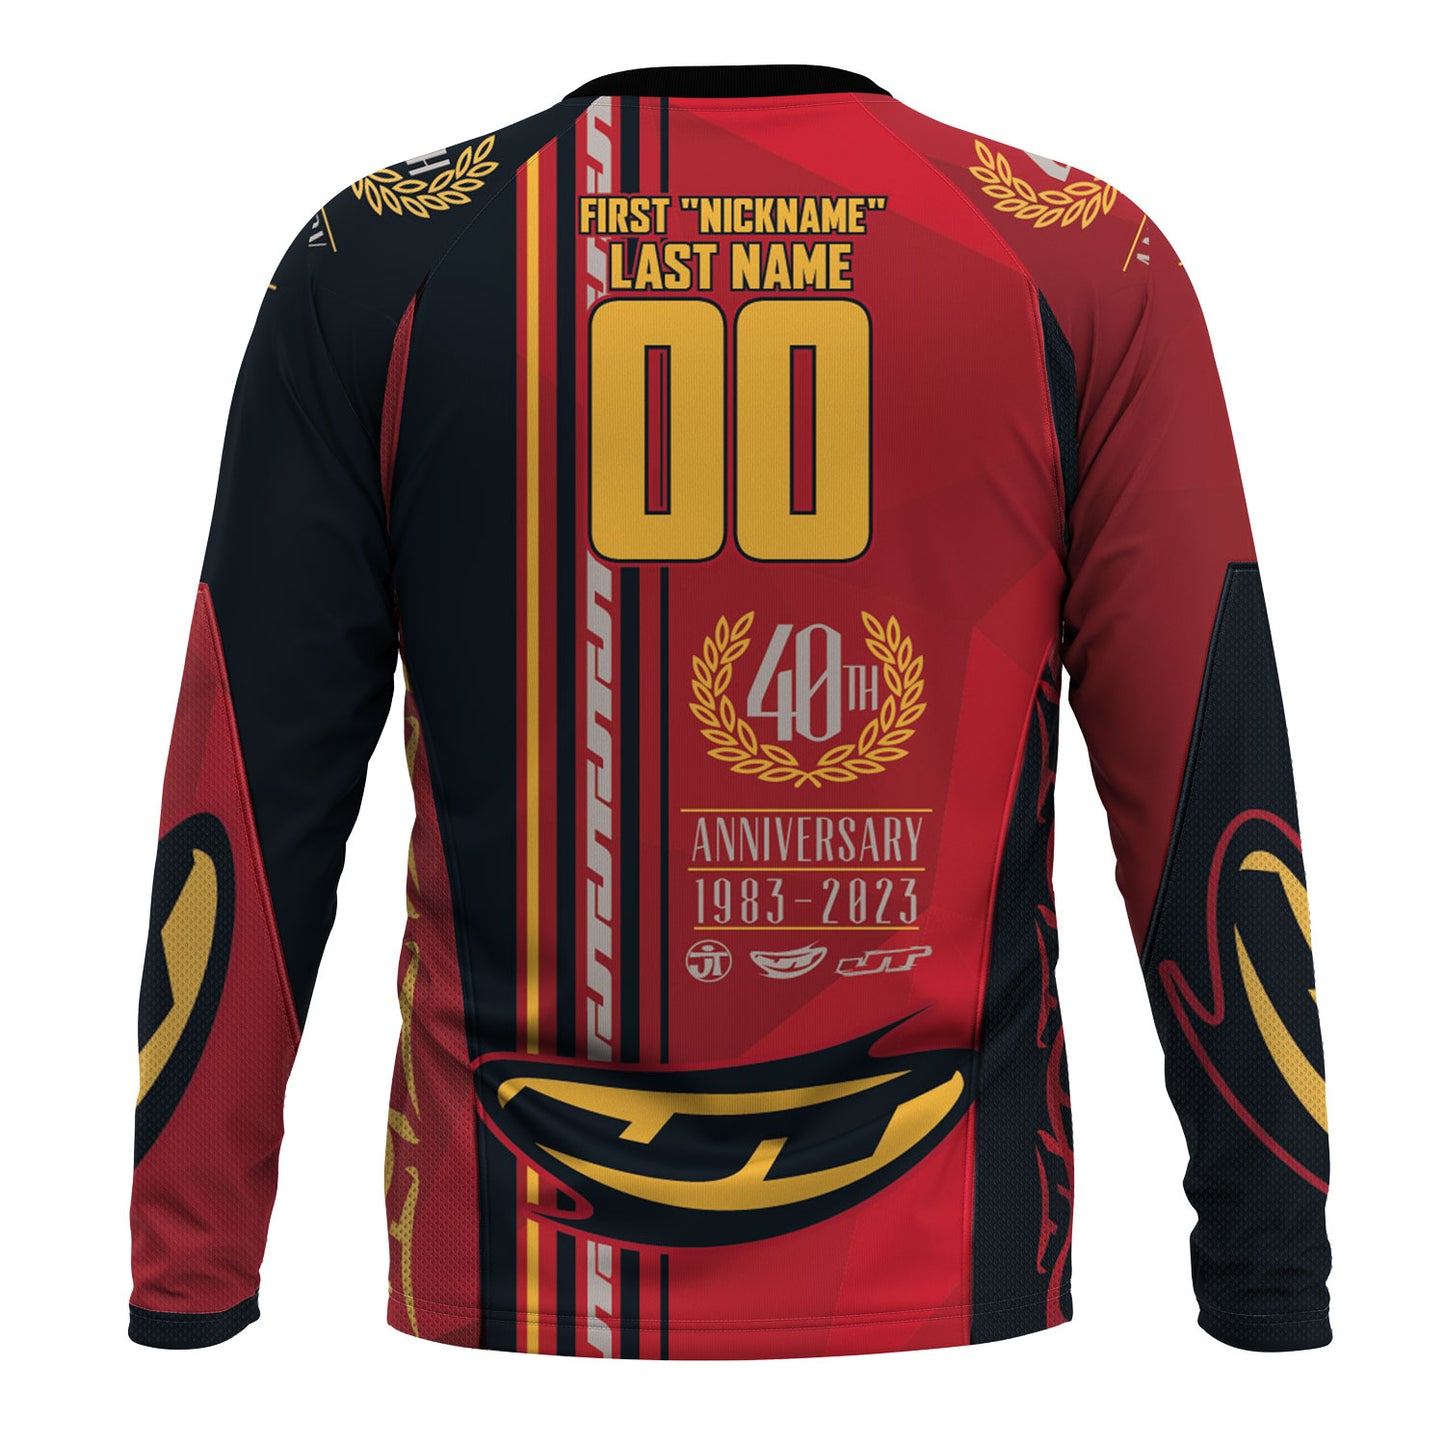 JT 40th Anniversary Contact Jersey - Discounted if you own the JT 40th Anniversary Proflex Goggle